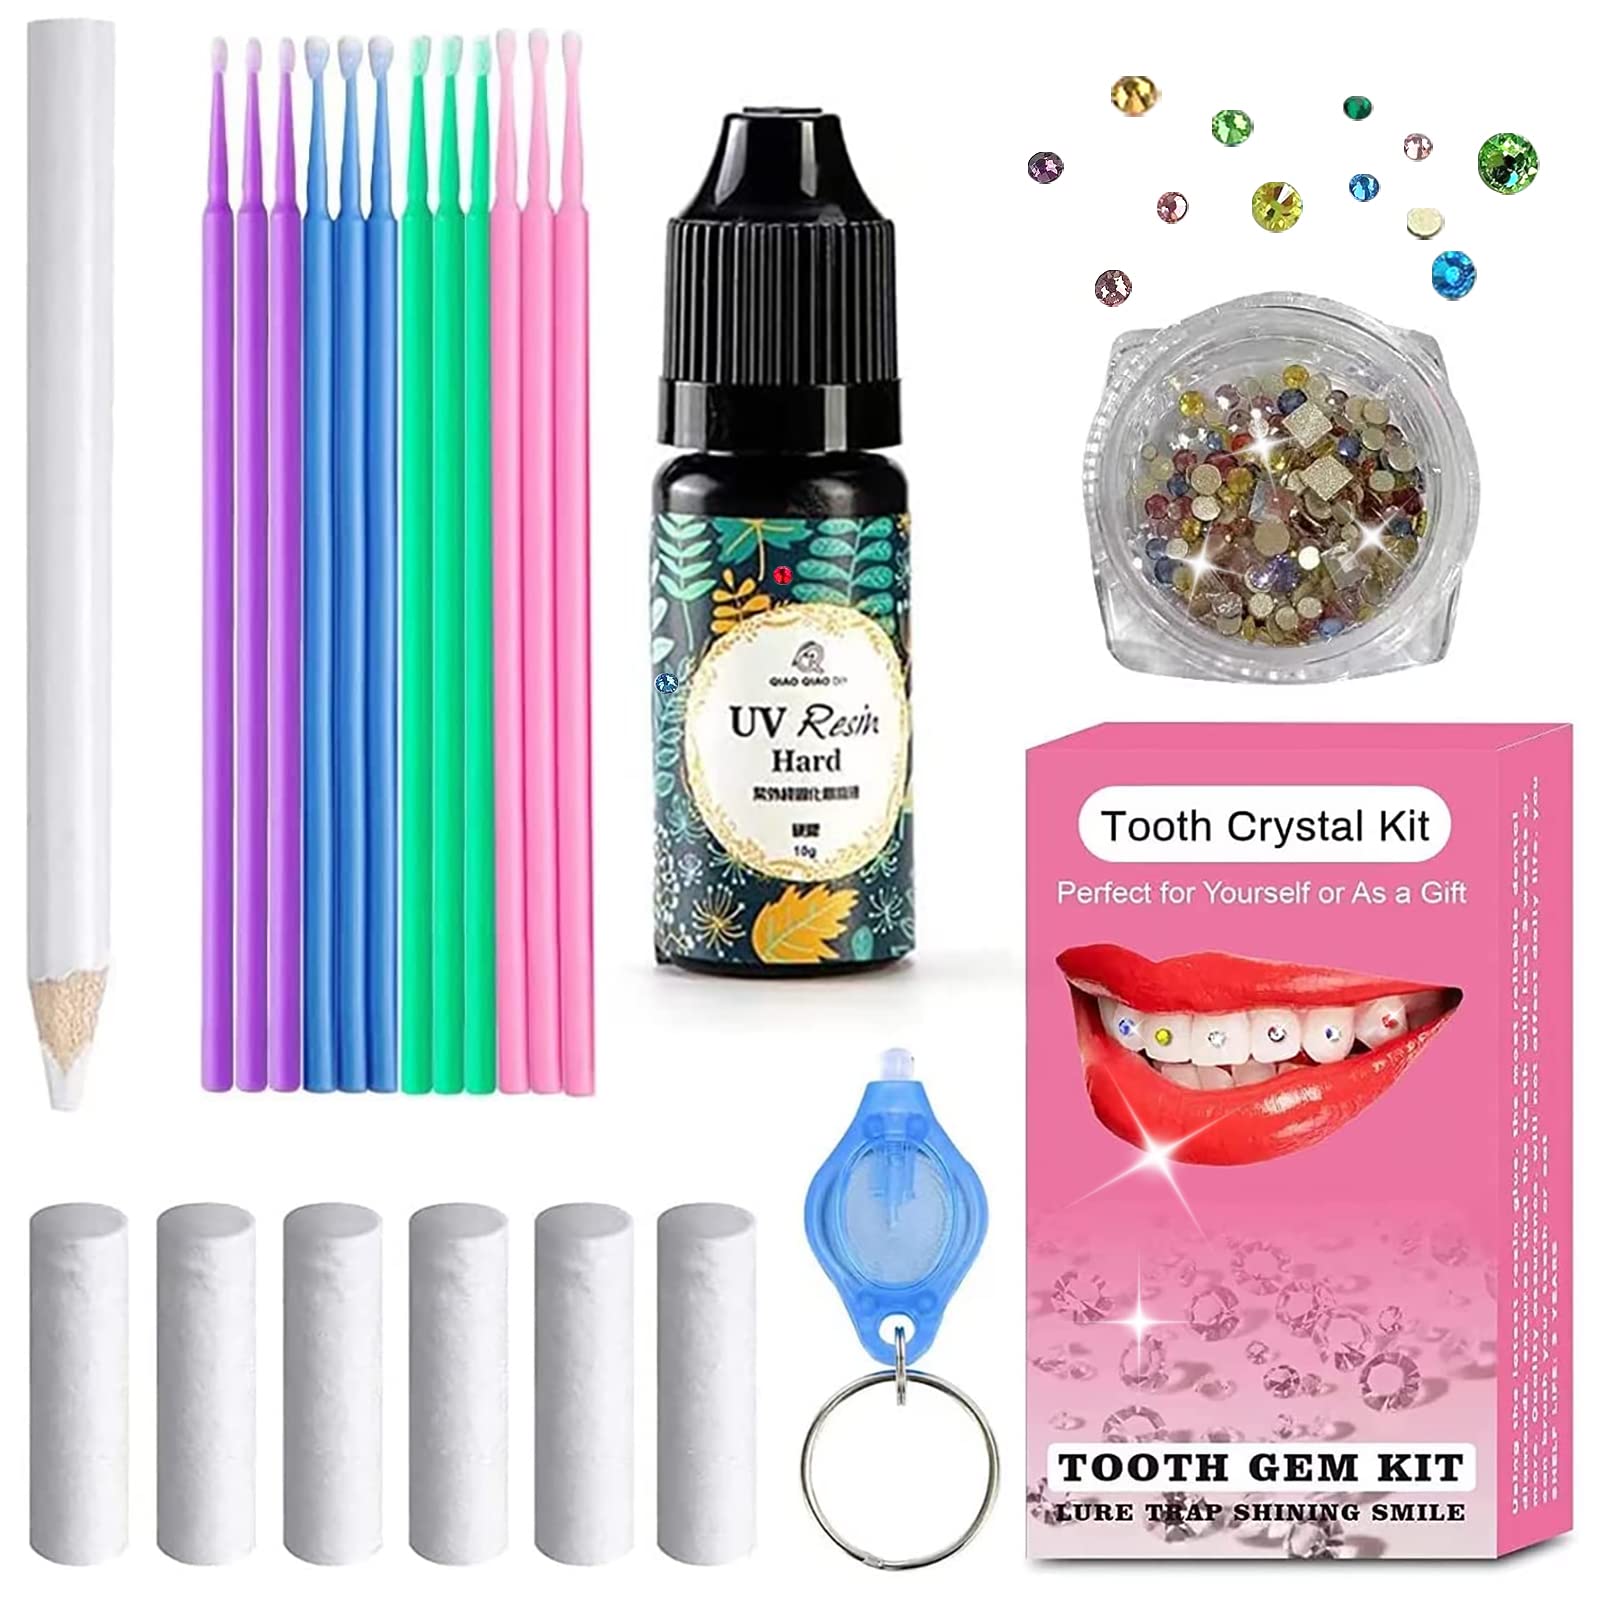 Summer Sale- DIY Teeth Gems Kit- Tooth Crystal Set with Glue UV Light &  Gems Picker- Great Tooth Jewelry Gems Kit for DIY Use- Professional 20  Pieces Crystals- Teeth Gems Kit for